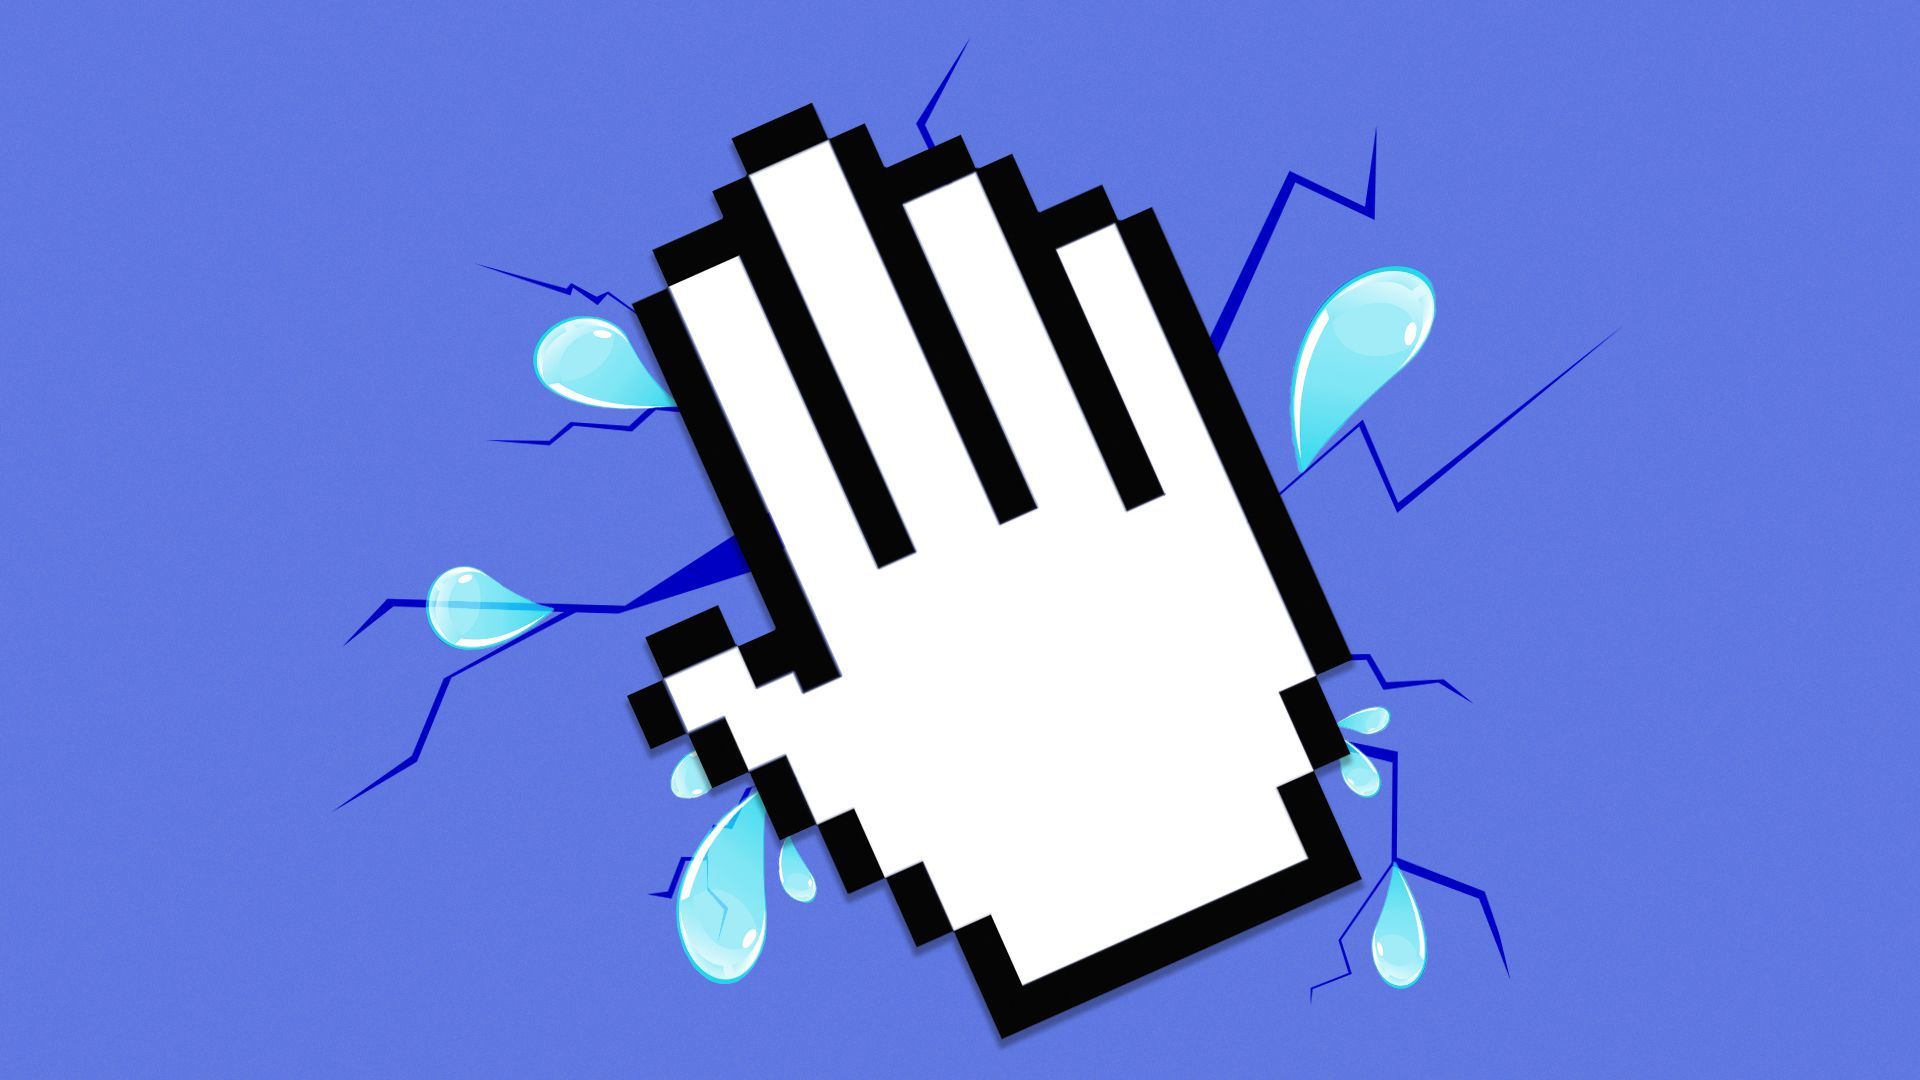 Illustration of a cursor hand covering a cracked wall with leaking water droplets